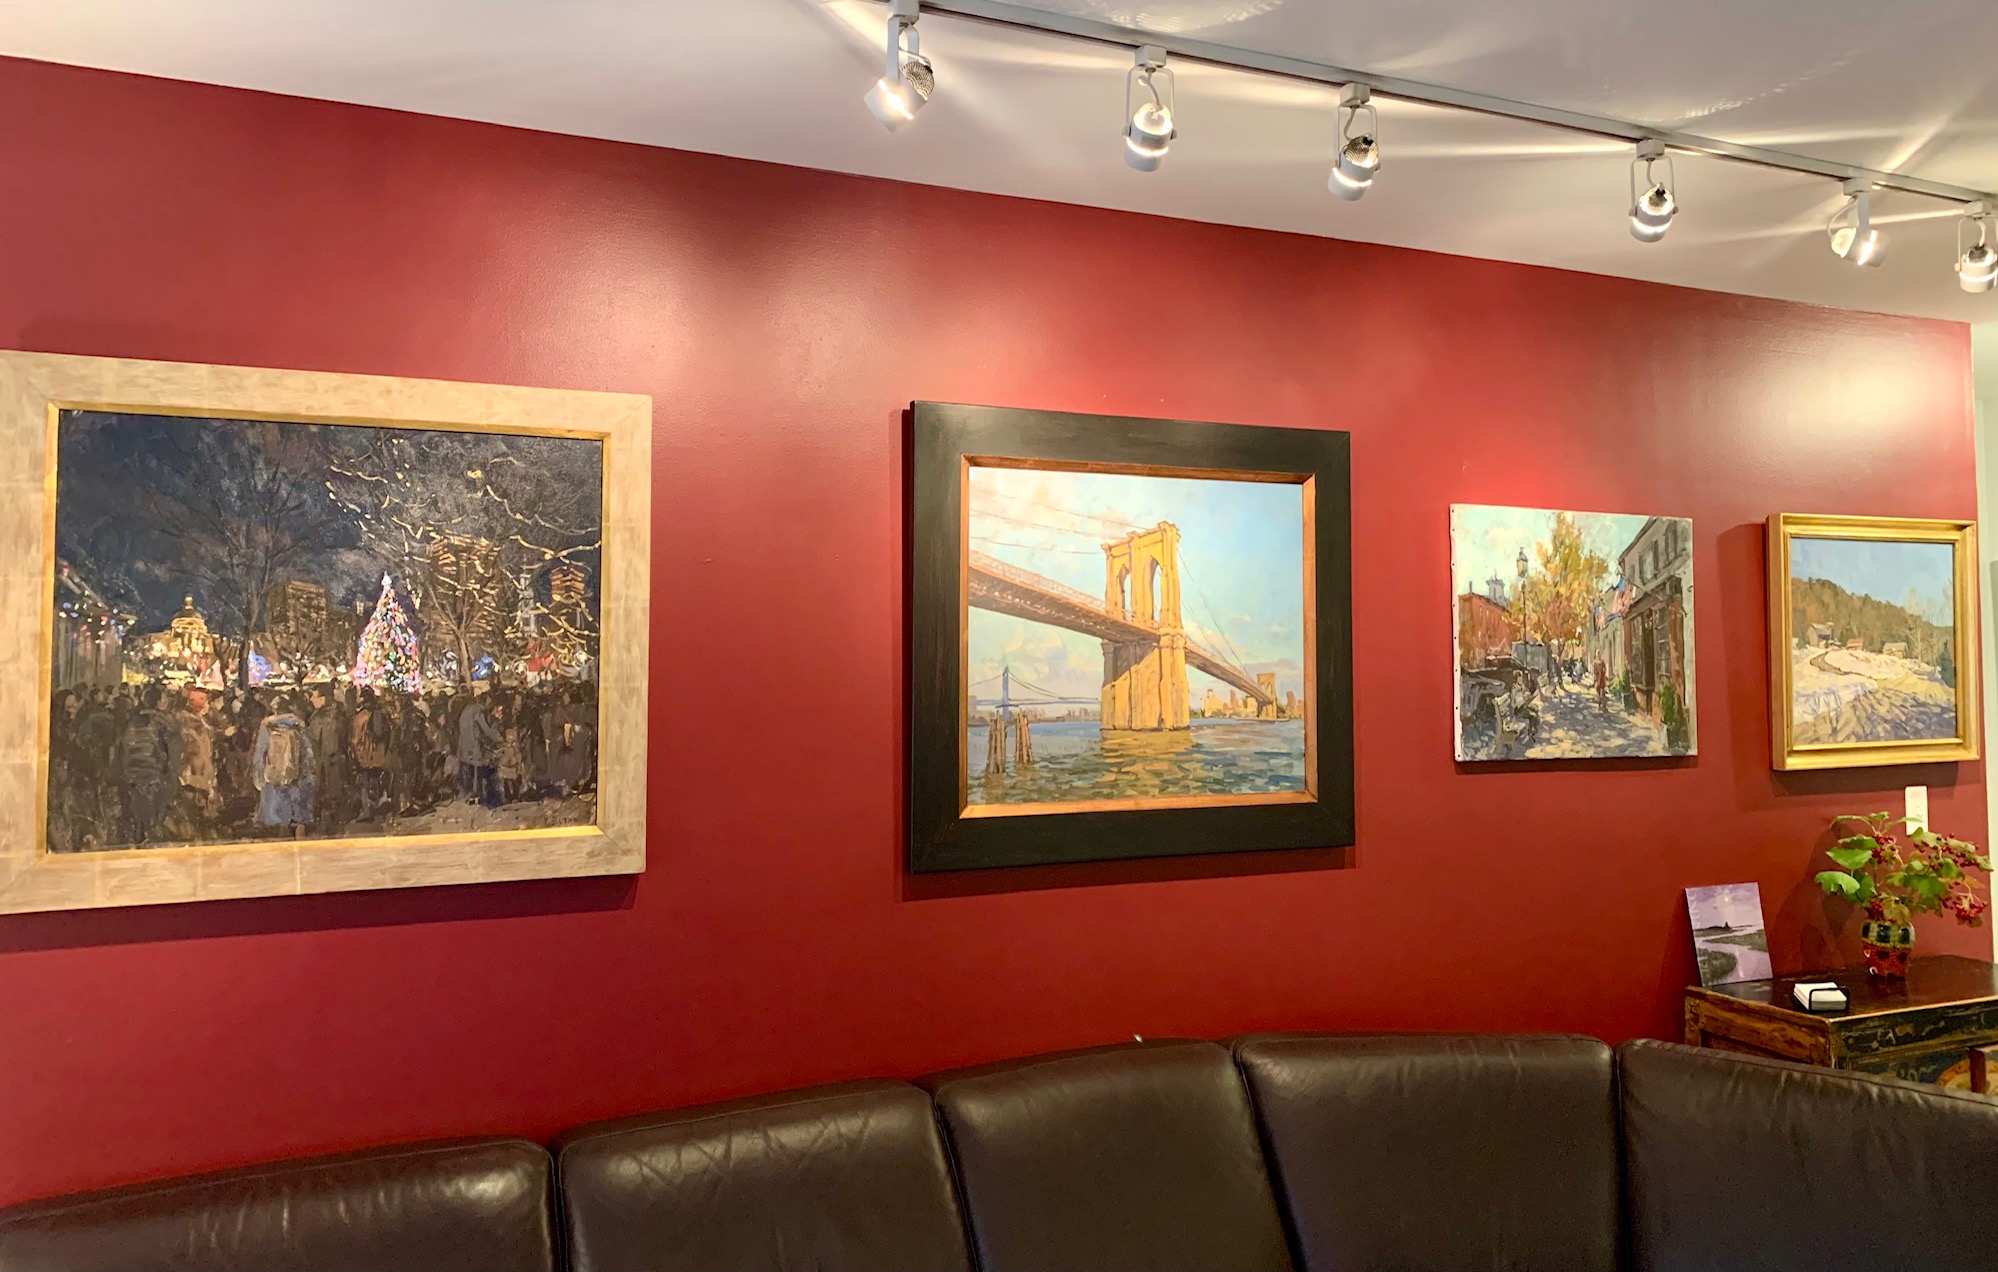 Viktor Butko impressionist paintings at the Holiday exhibit from October 25- December 25th and the Gallery closing on December 31, 2022